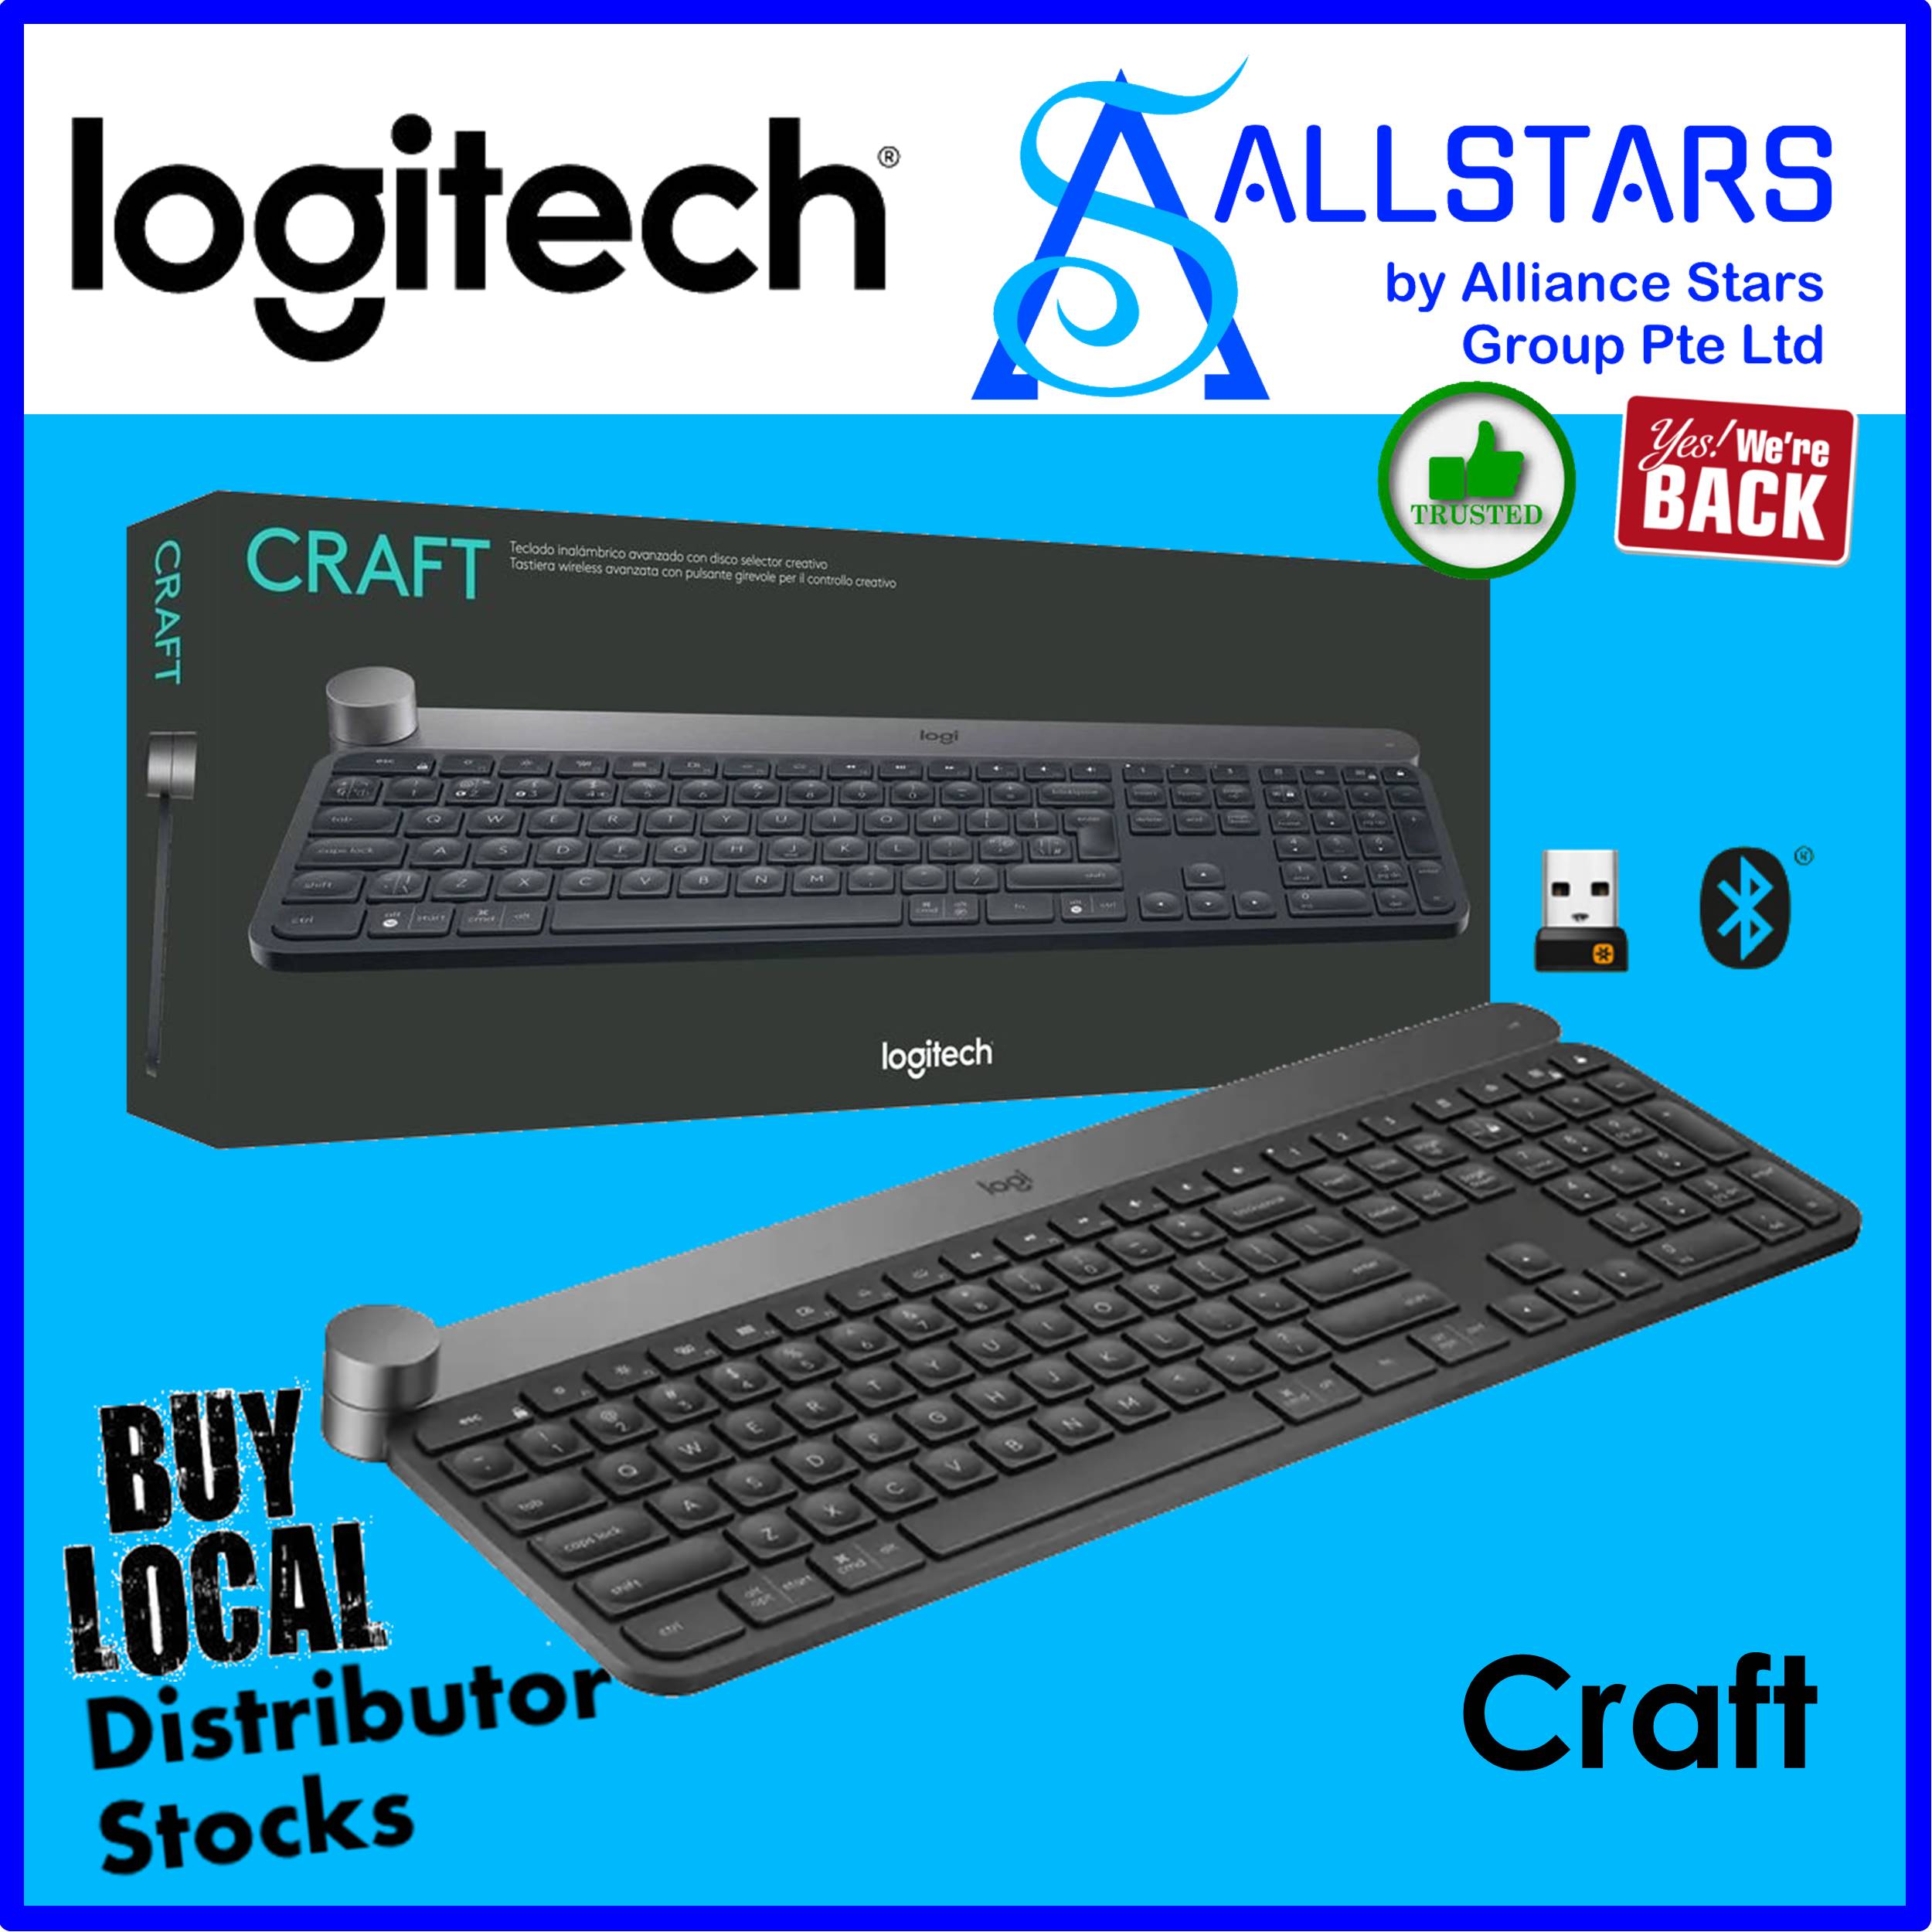 ALLSTARS : We are Back / Keyboard Promo) Logitech Advanced Wireless Keyboard / Advanced Keyboard with Creative Input Dial (920-008507) (Warranty with Local Distributor BanLeong) | Singapore